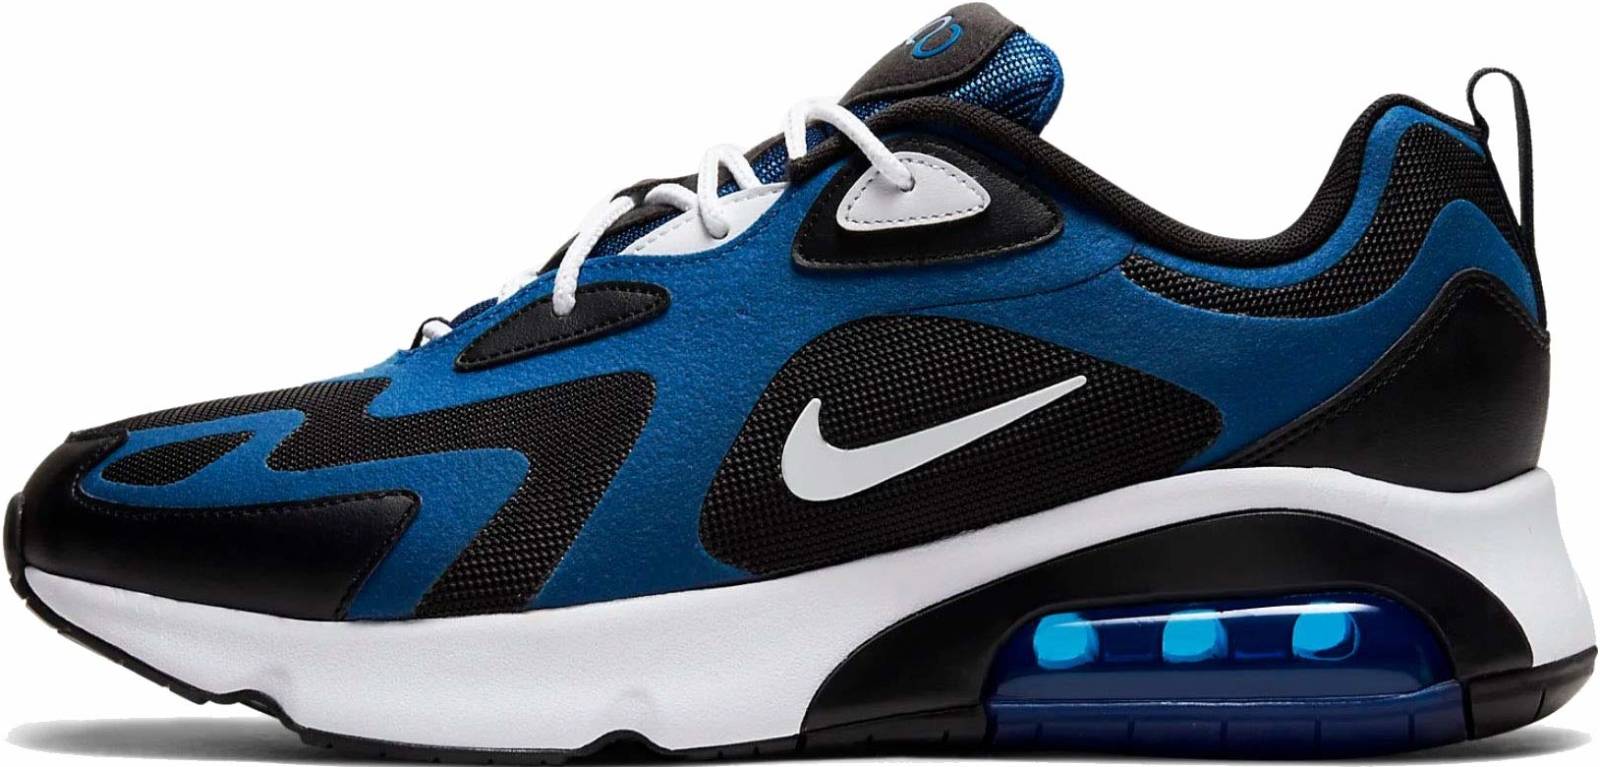 Save 37% on Blue Nike Sneakers (133 